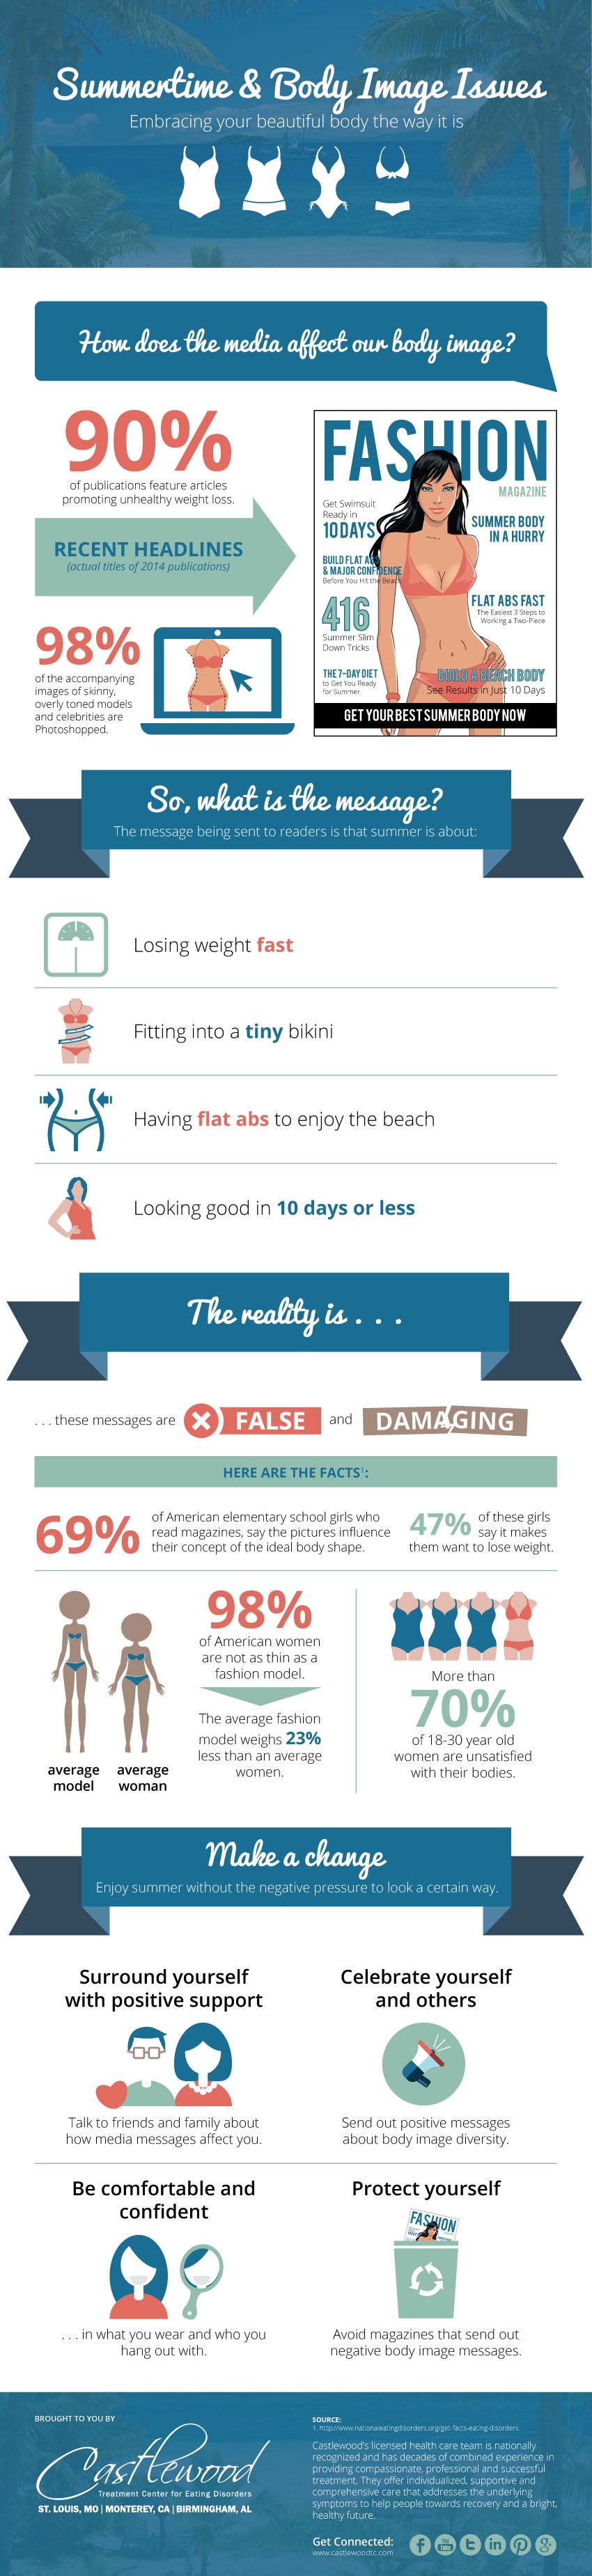 CW-Infographic-Summer-Body-Image-Final